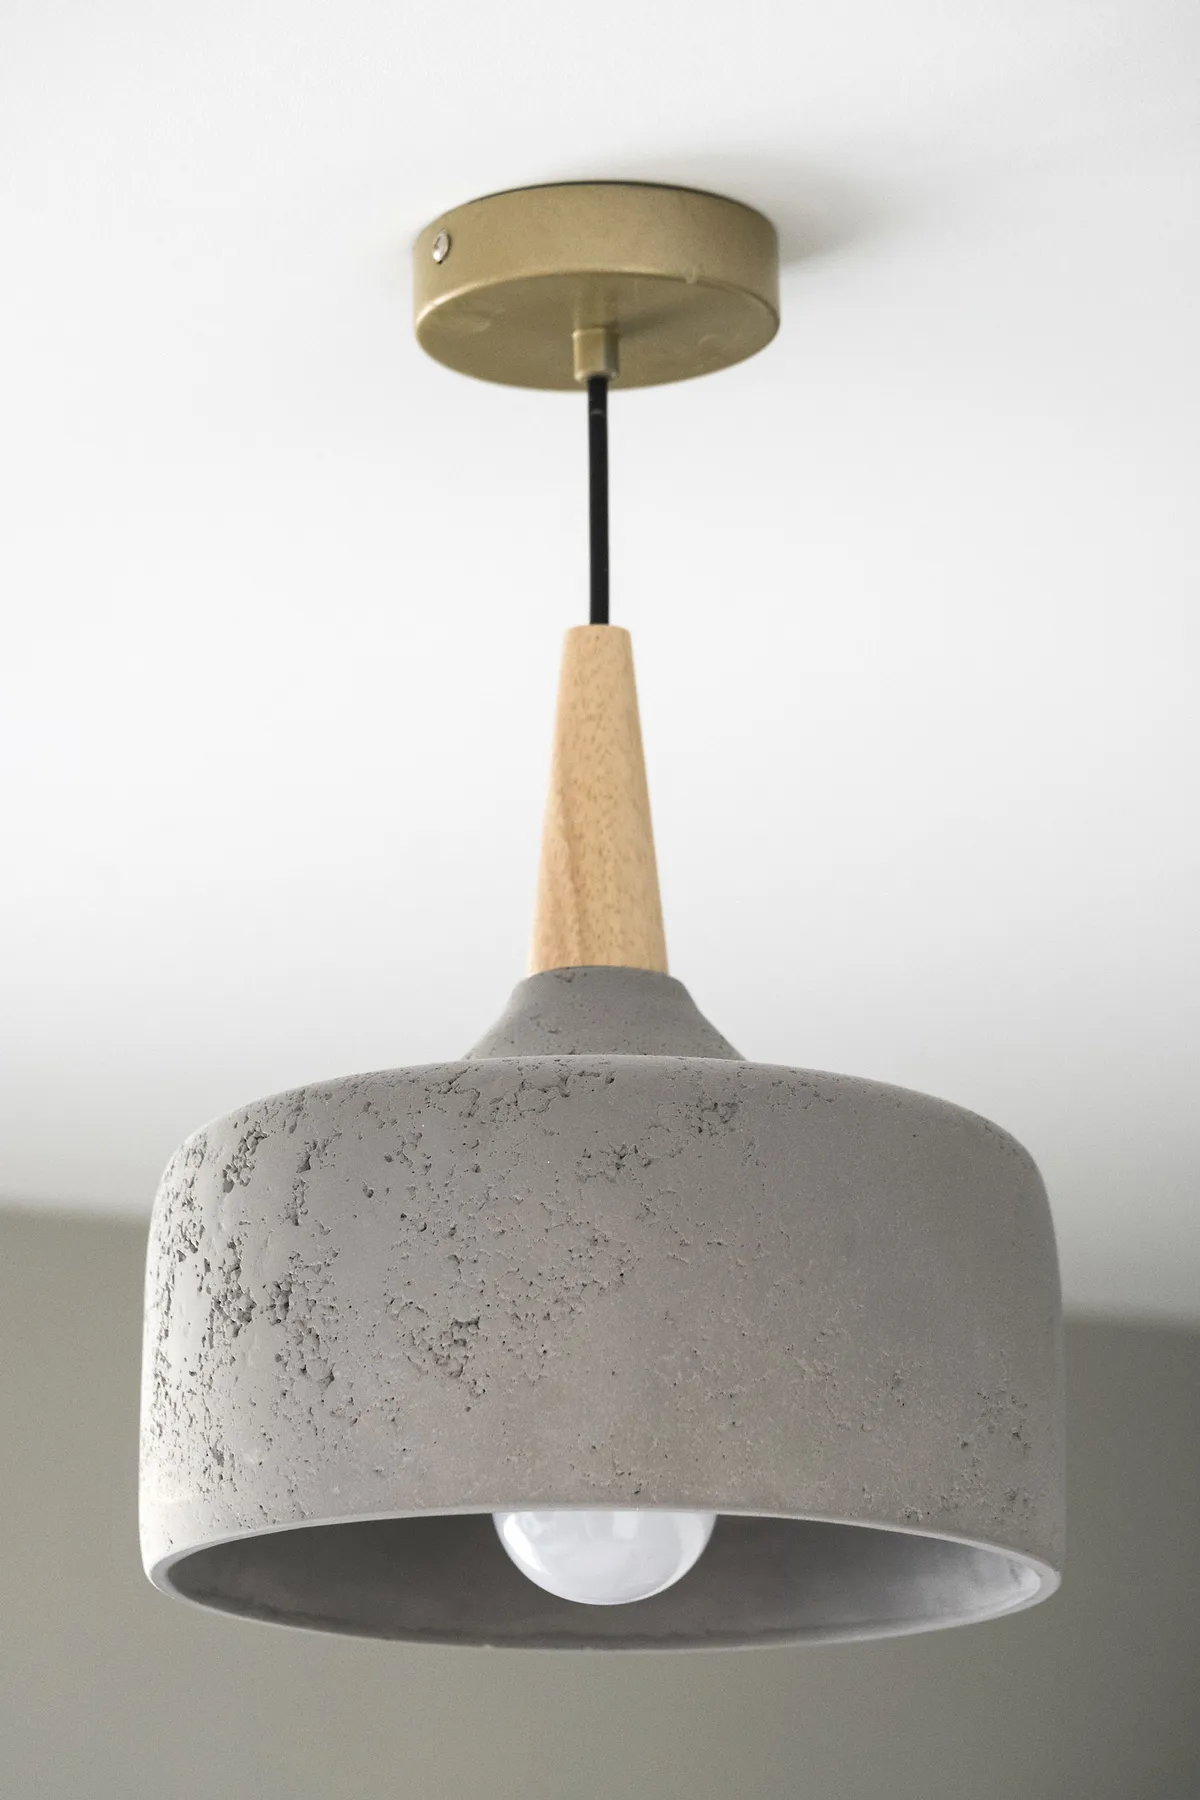 Good idea! The ceiling light’s mix of natural wood and concrete adds texture to an otherwise sleek scheme